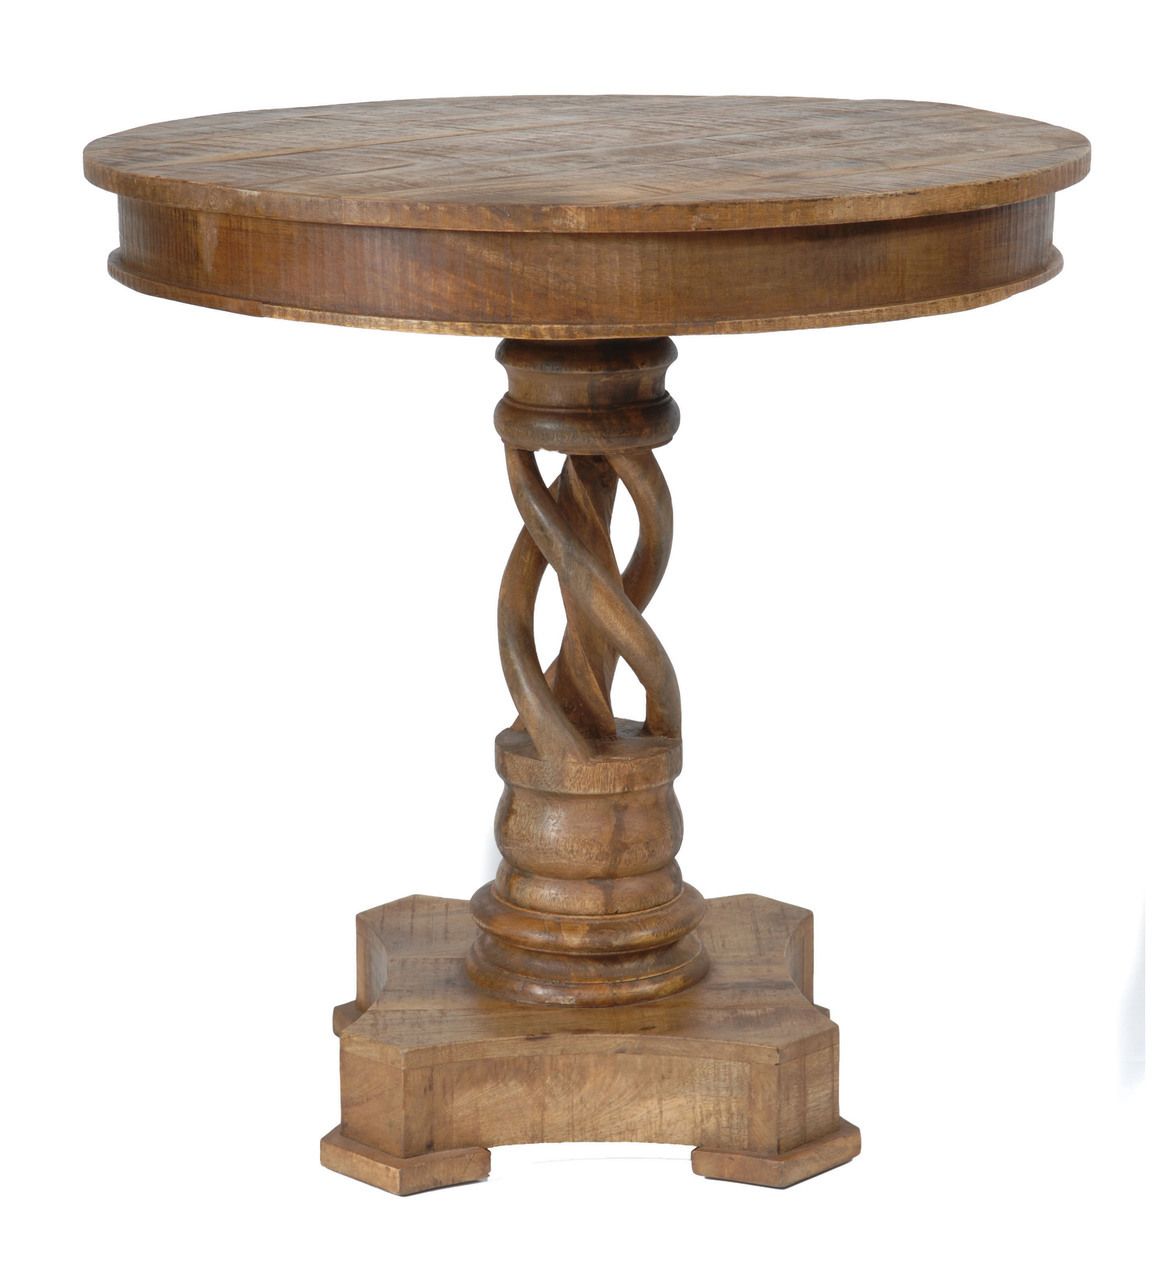 bengal manor mango wood twist accent table inches tall pedestal wide zeckos coffee cover ideas narrow living room sets black half moon hanging barn doors white resin outdoor side